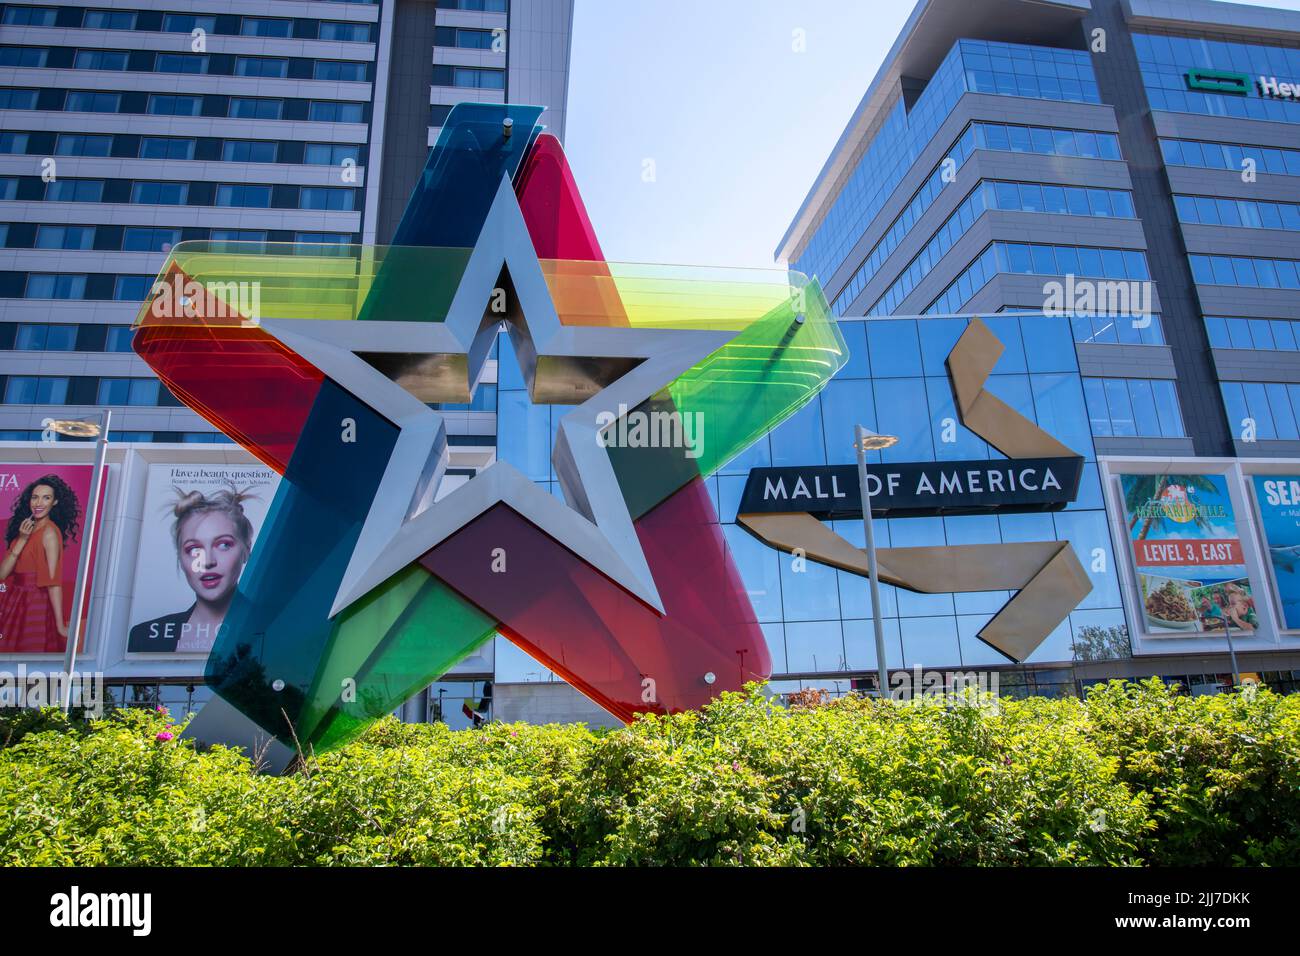 Bloomington, Minnesota. Mall of America. One of the largest malls in the world it is home to over 500 stores. Stock Photo